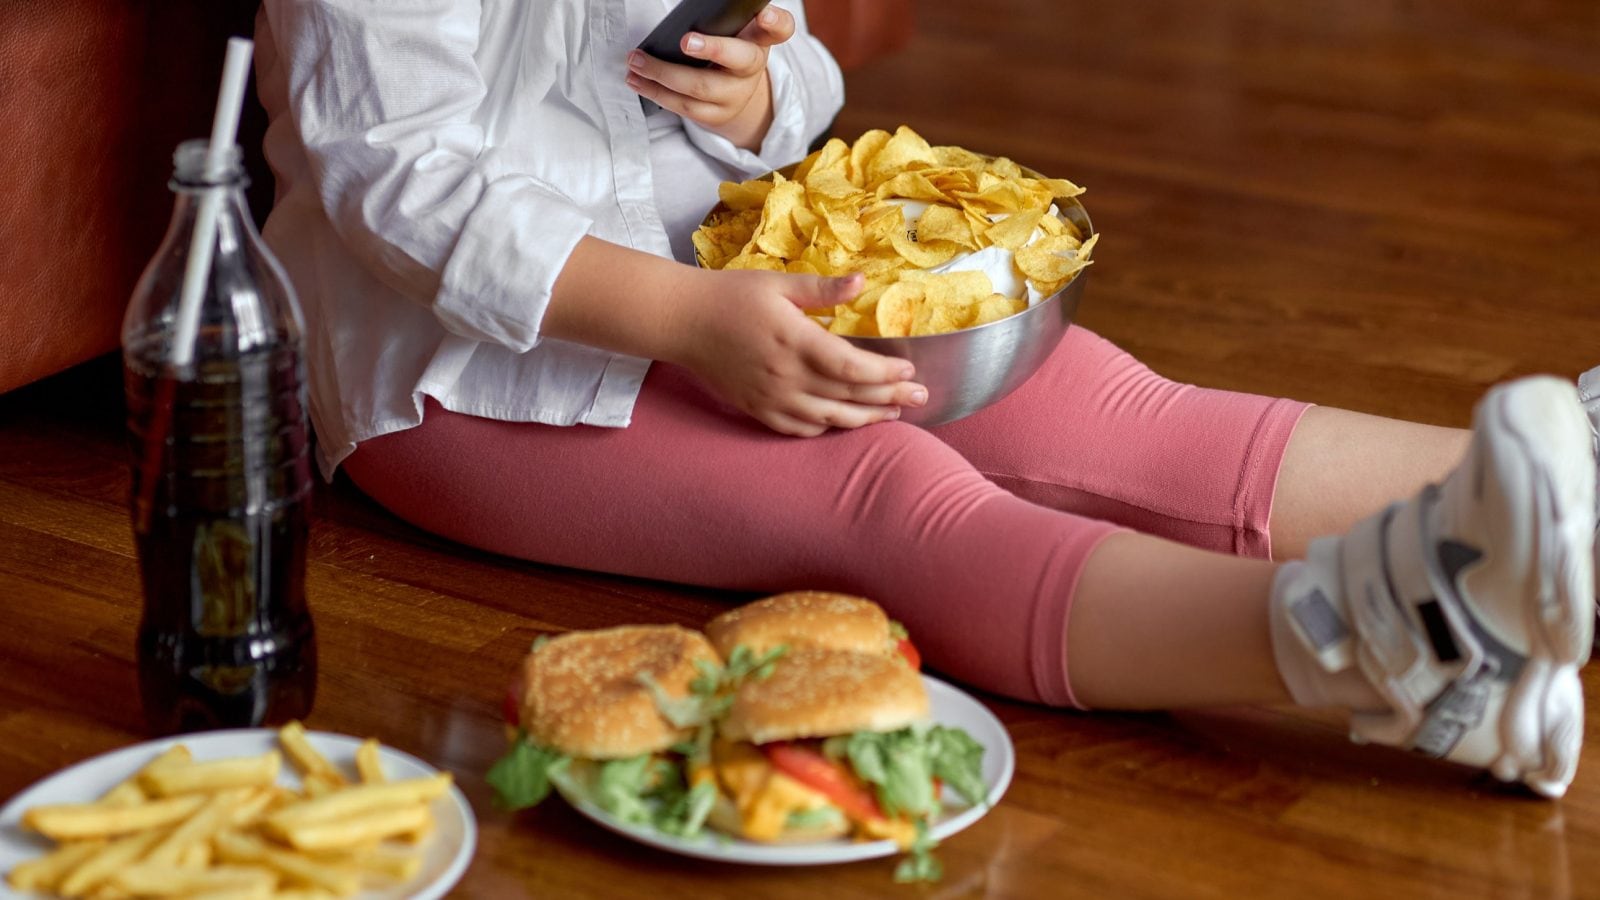 World Obesity Day 2023: Tips for Parents to Manage Childhood Obesity